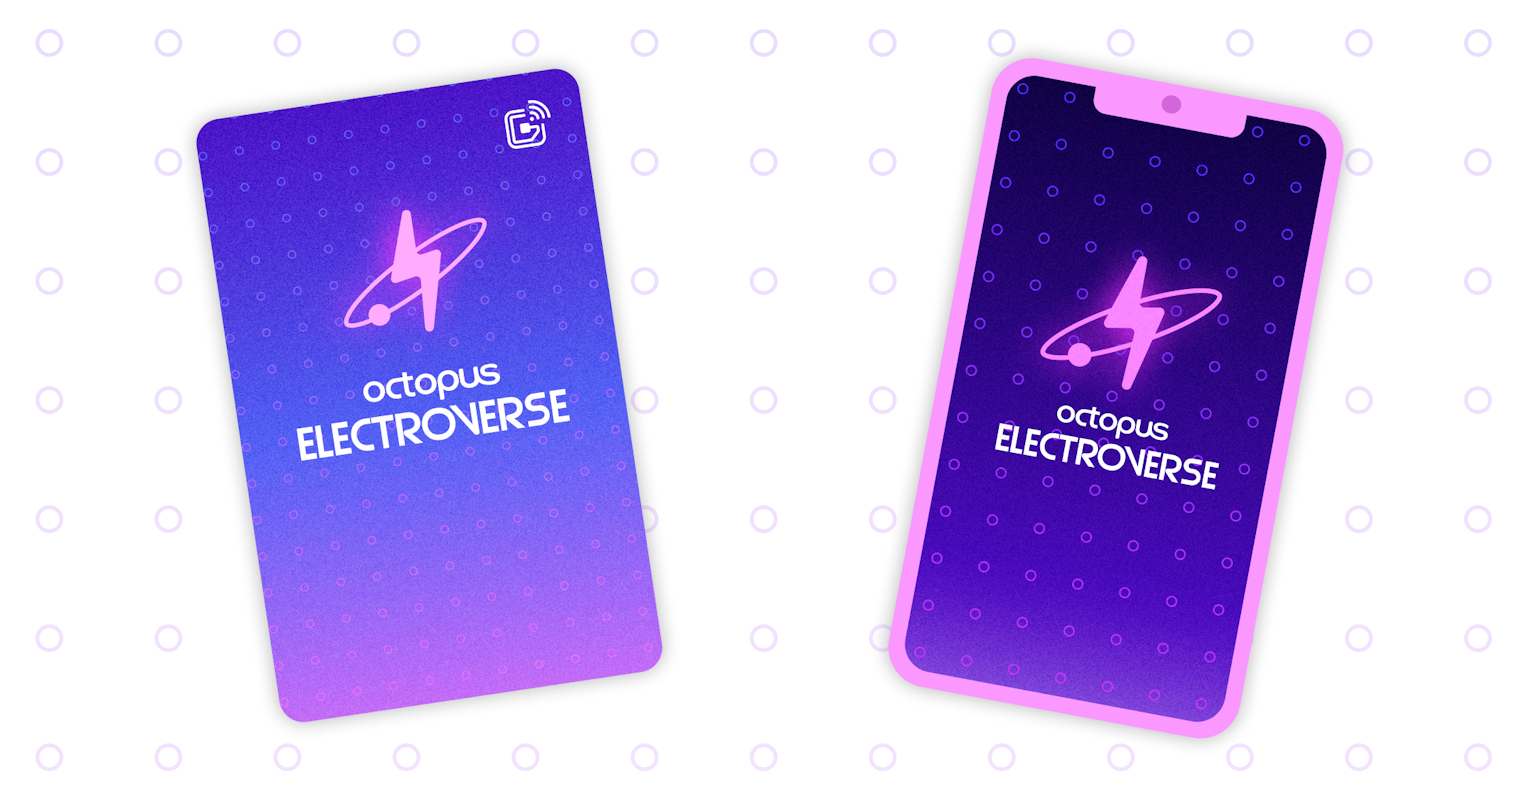 Electroverse app on phone screen and card